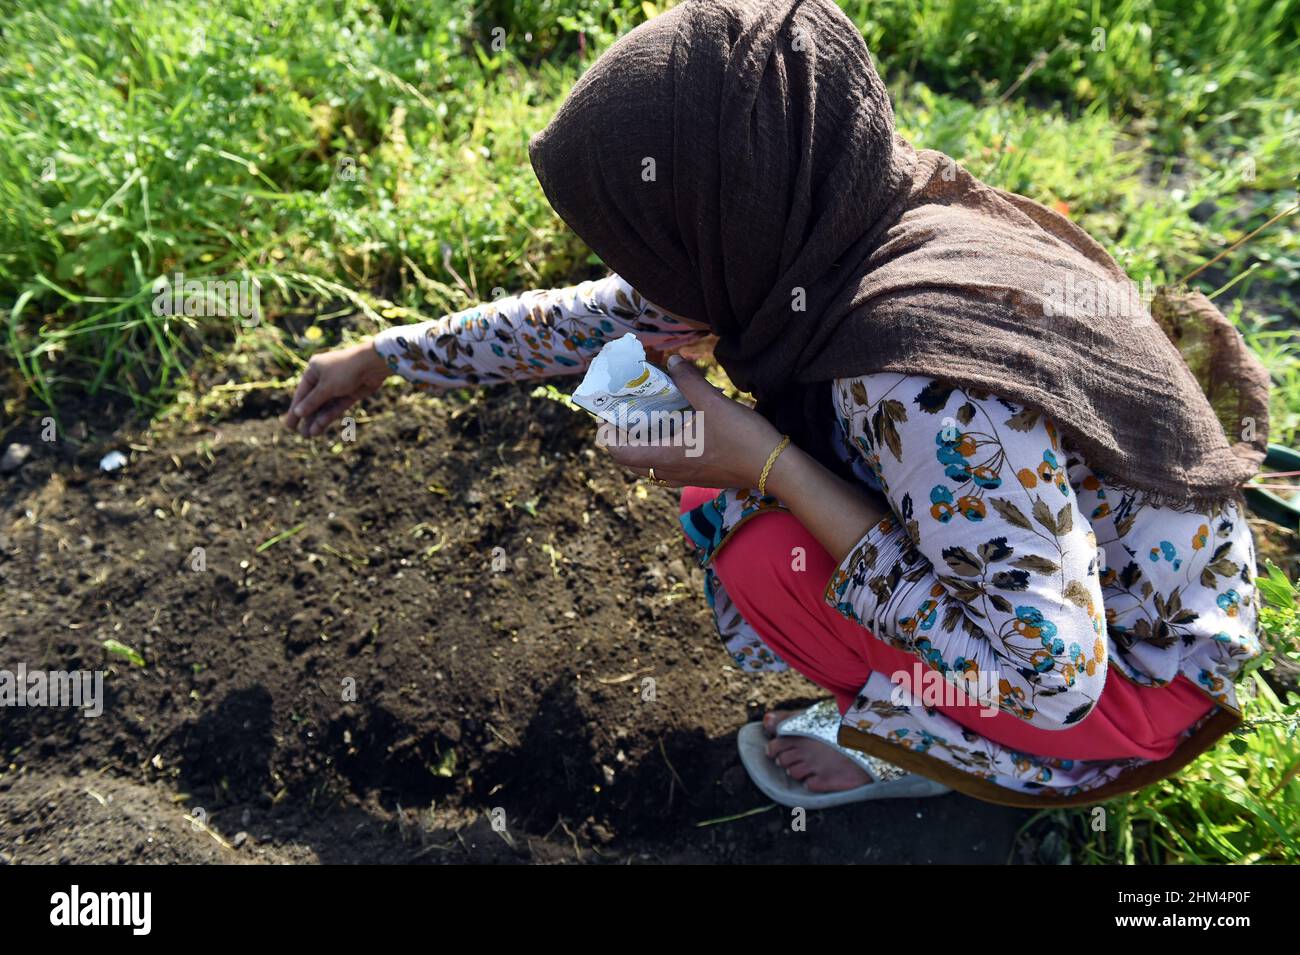 A young woman sows seeds on a community allotment, Leeds, UK Stock Photo